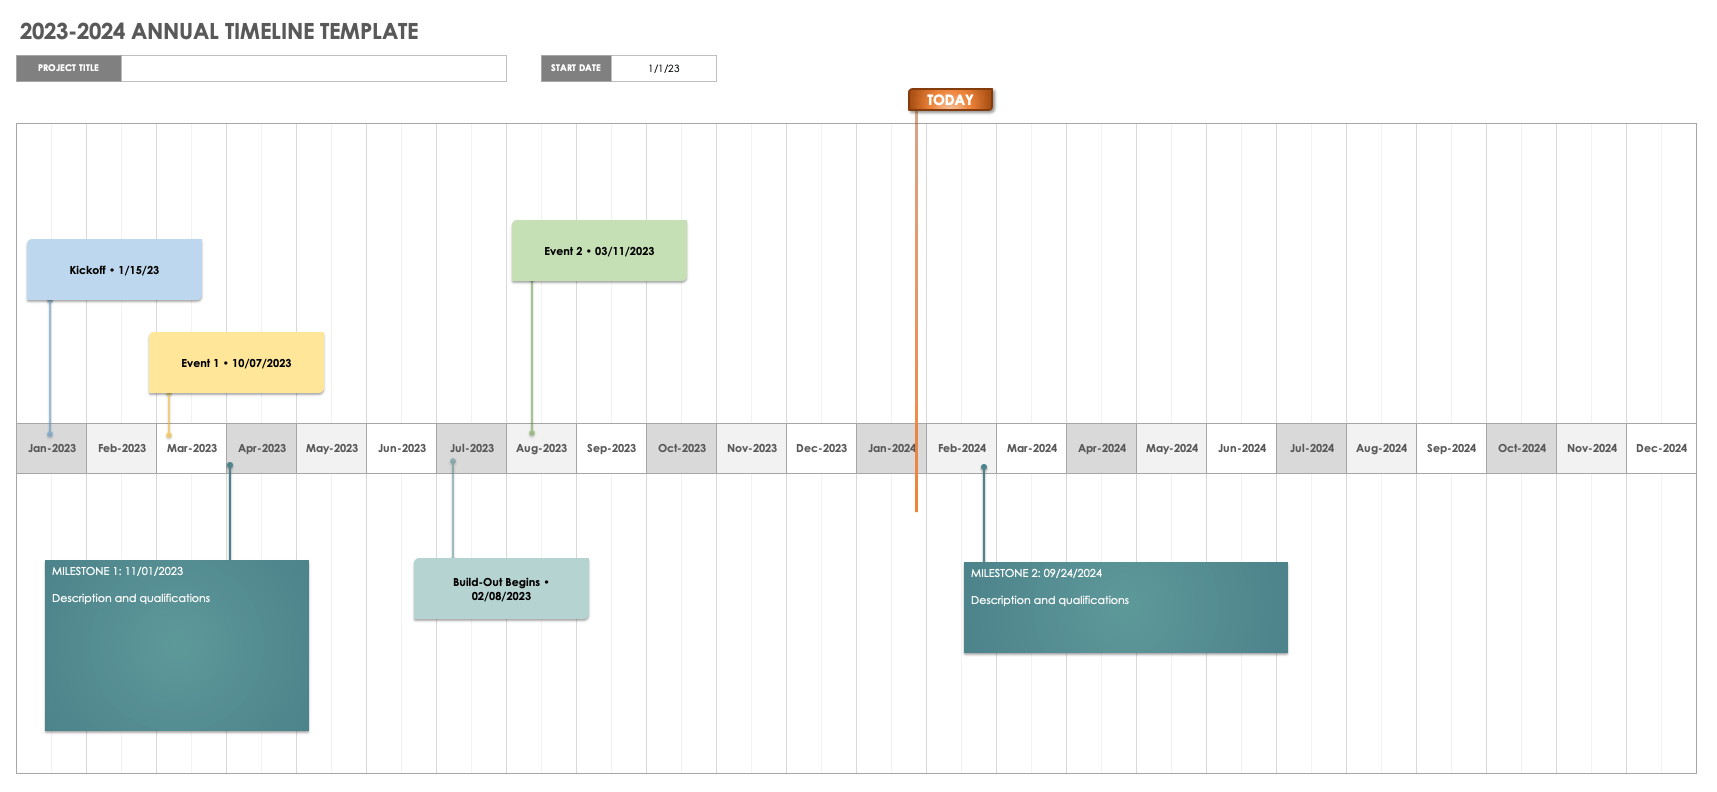 2023-2024 Annual Project Timeline Template